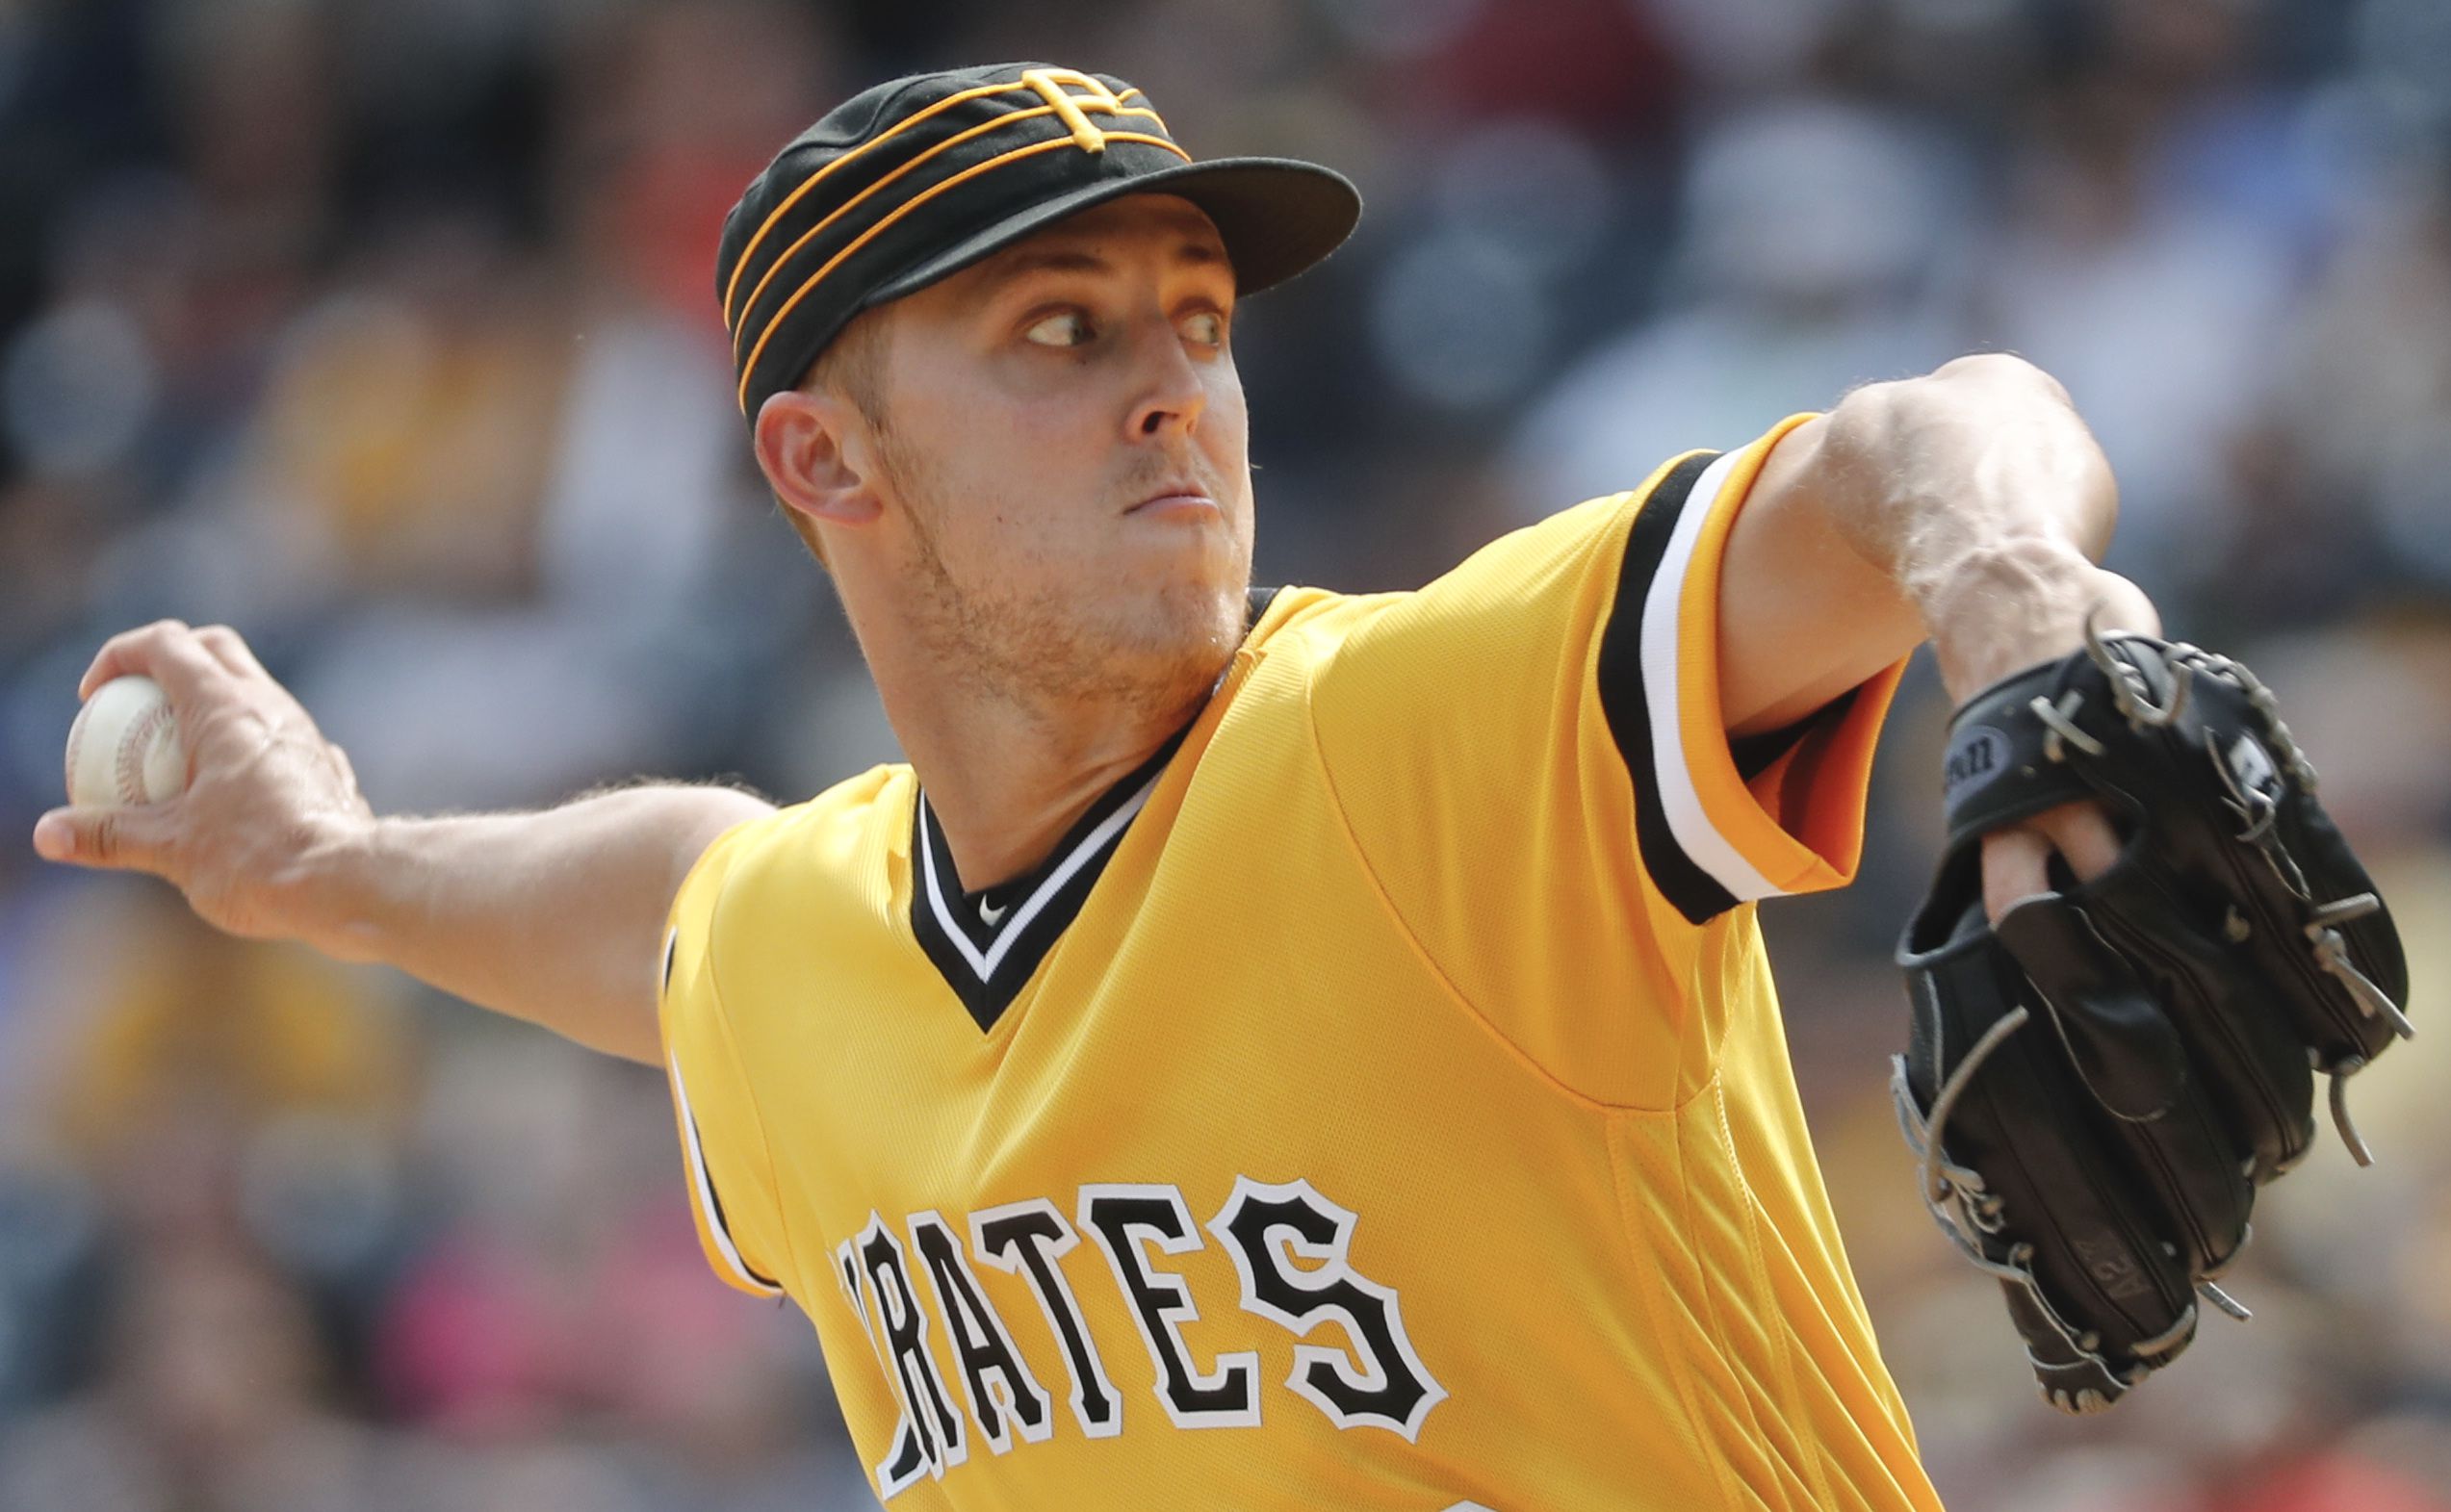 Jameson Taillon is like the Yankees: Big hype, small results